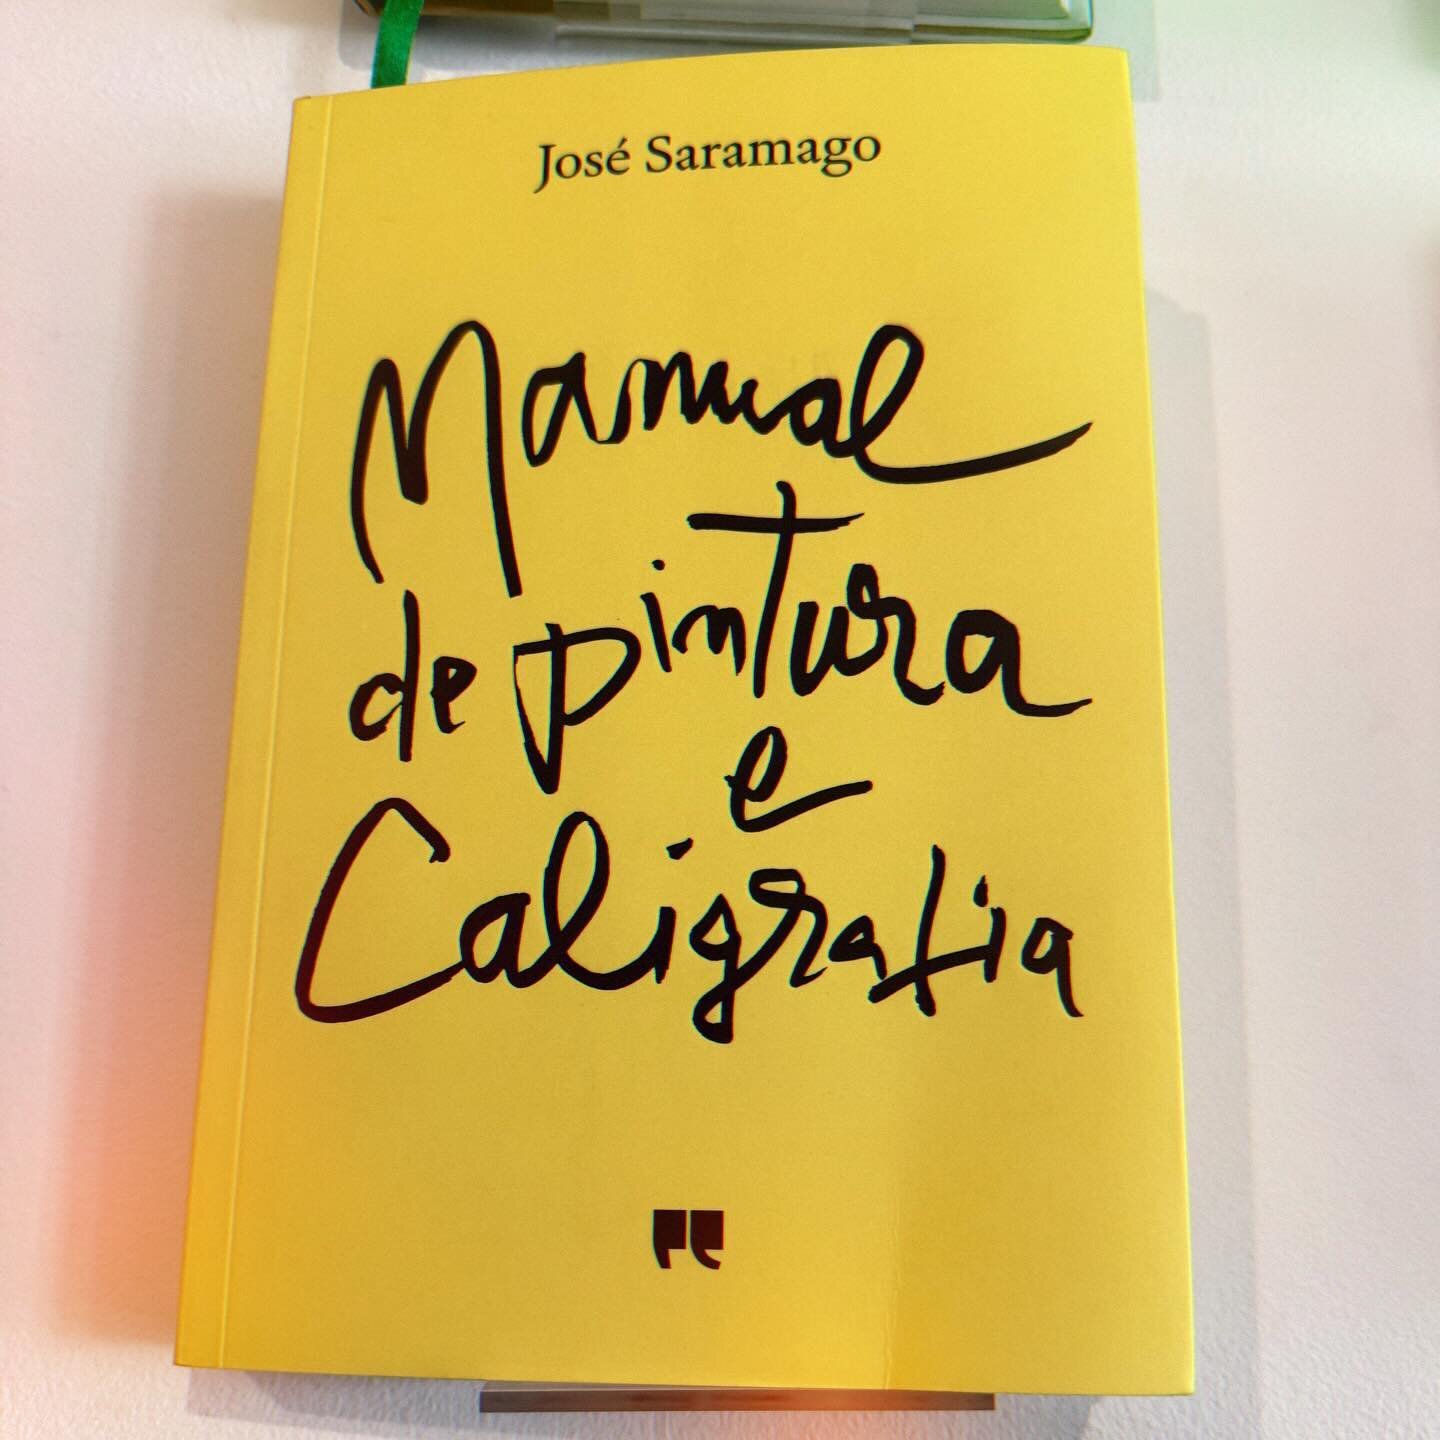 Cool loose lettering on the cover of this version of Saramago&rsquo;s first novel. #saramago #modernlettering #lisbon #jos&eacute;saramagofoundation #casadosbicos